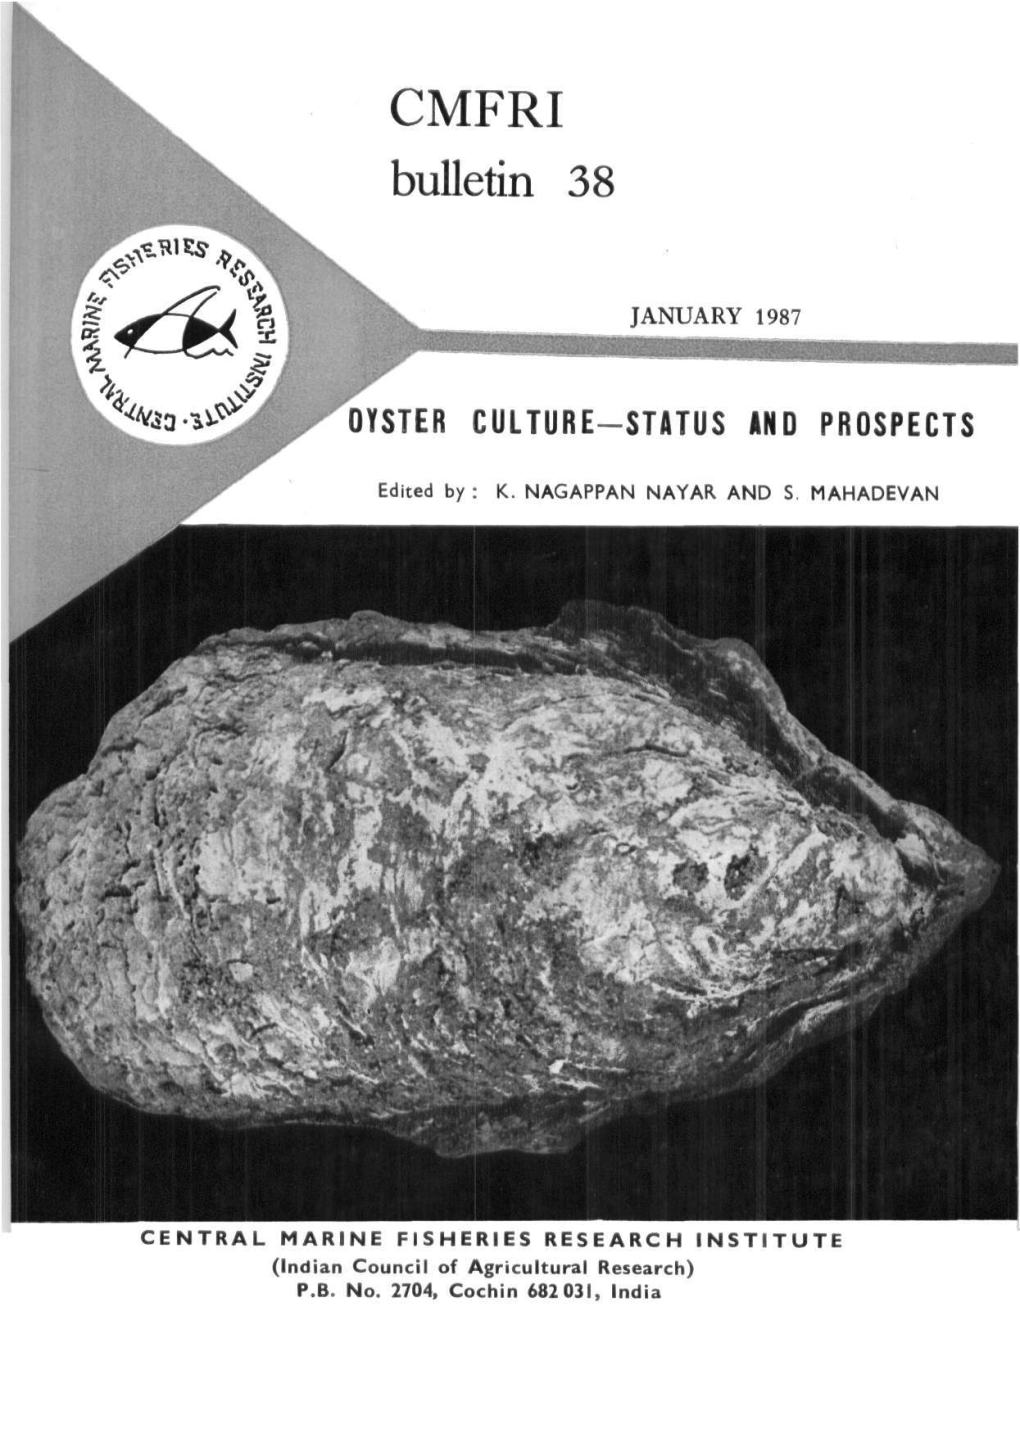 ?^Te.^I.^ OYSTER CULTURE-STATUS and PROSPECTS